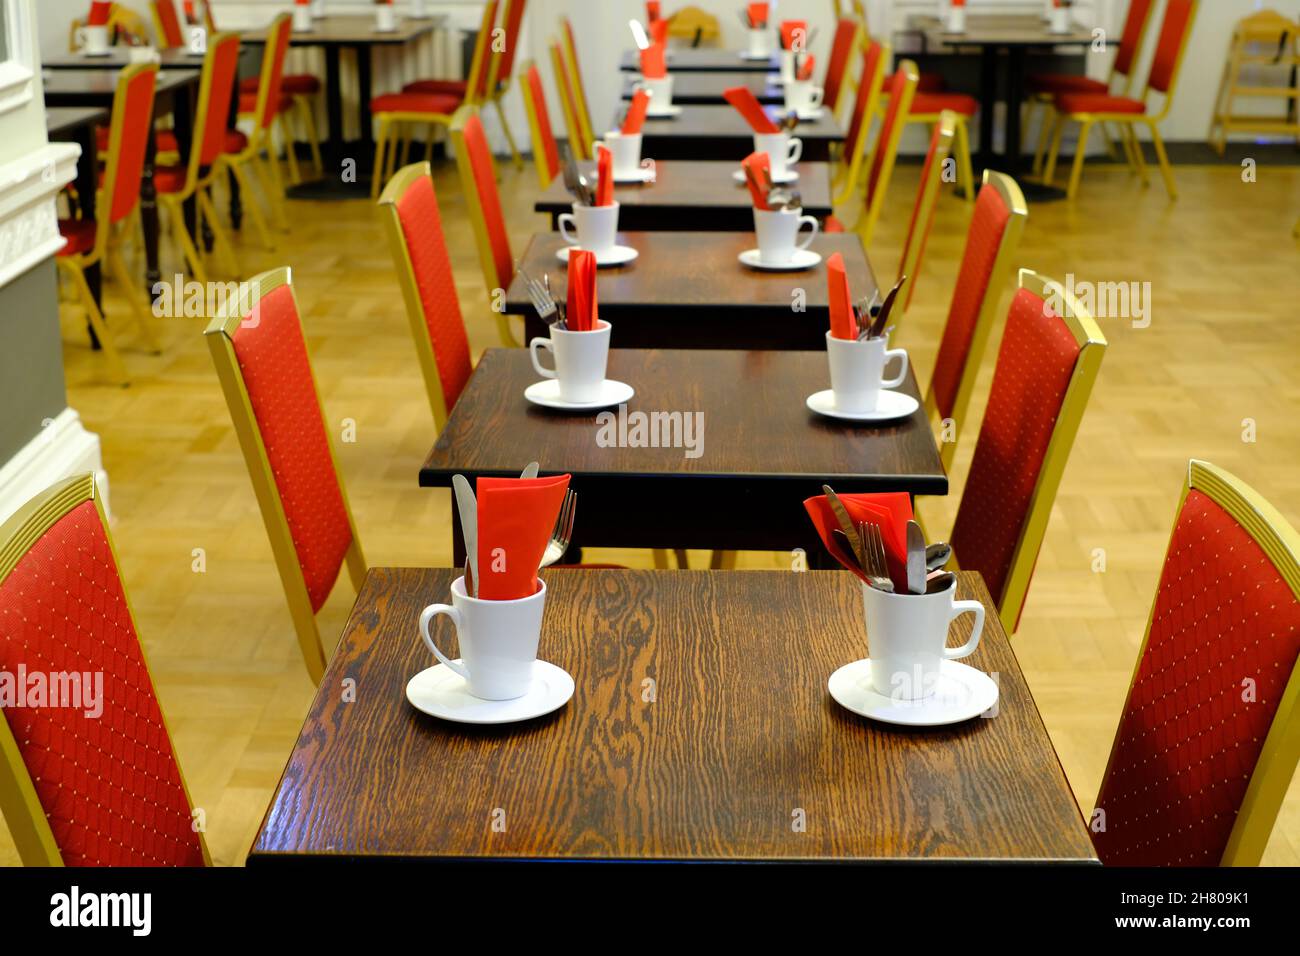 Regimented rows of tables and red chairs in a large hotel dining room suggest formality rather than relaxed comfort. Stock Photo